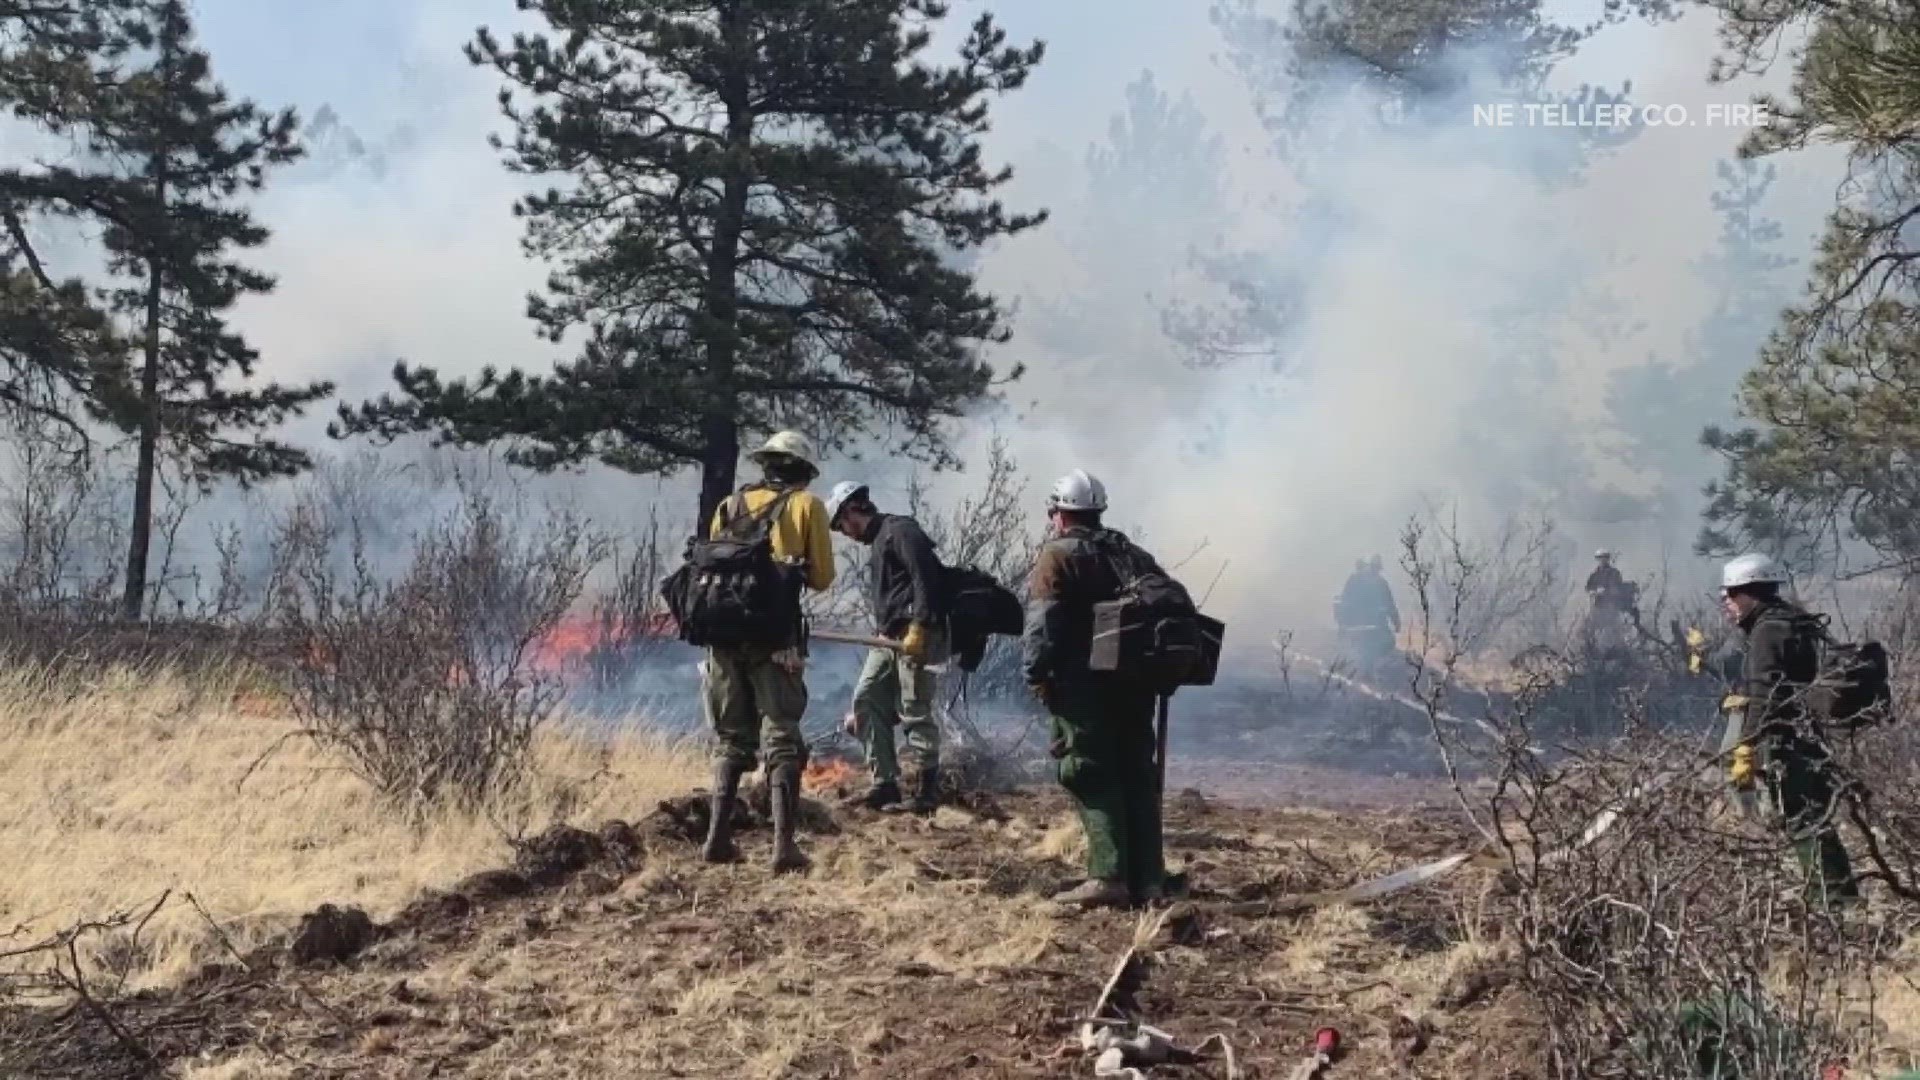 The fire in Park and Teller counties is about 1,200 acres in size.